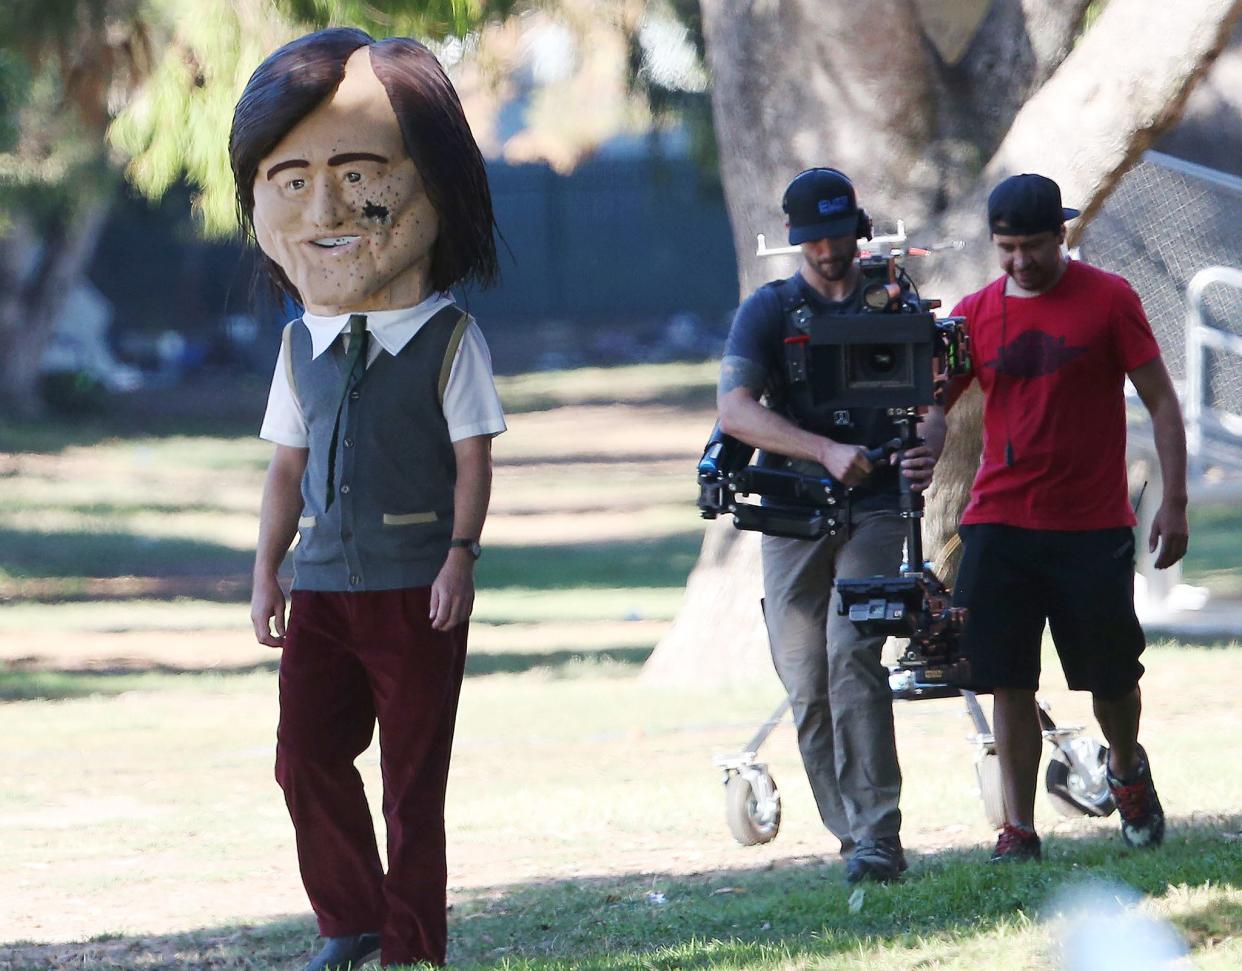 Carrey was seen in two different outfits during filming, all while still wearing the oversized papier mache head.